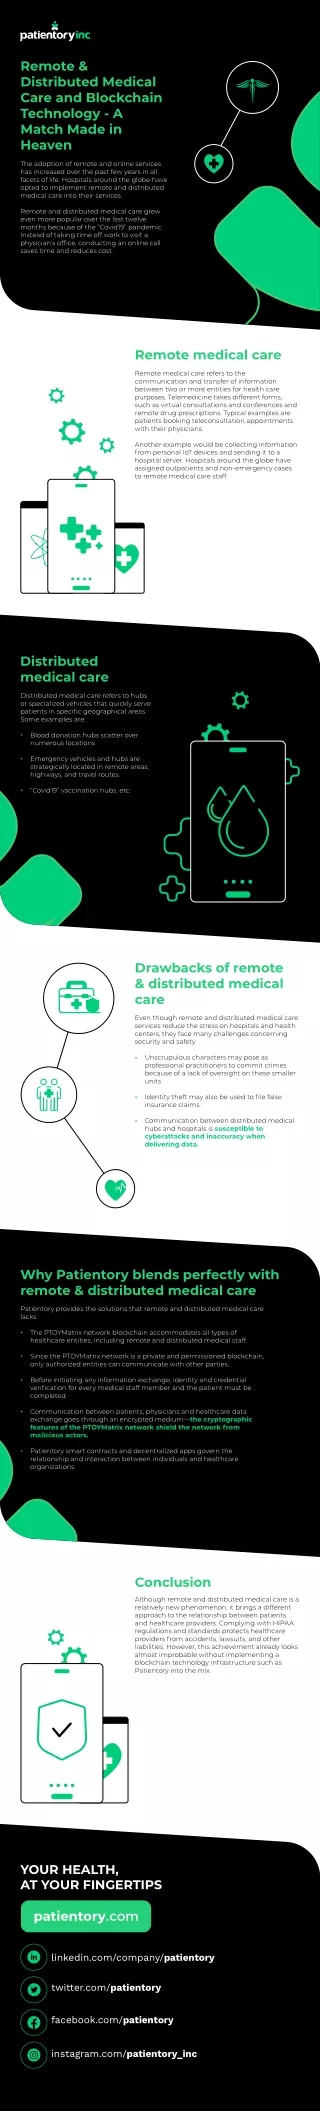 Remote & Distributed Medical Care and Blockchain Technology - A Match Made in He